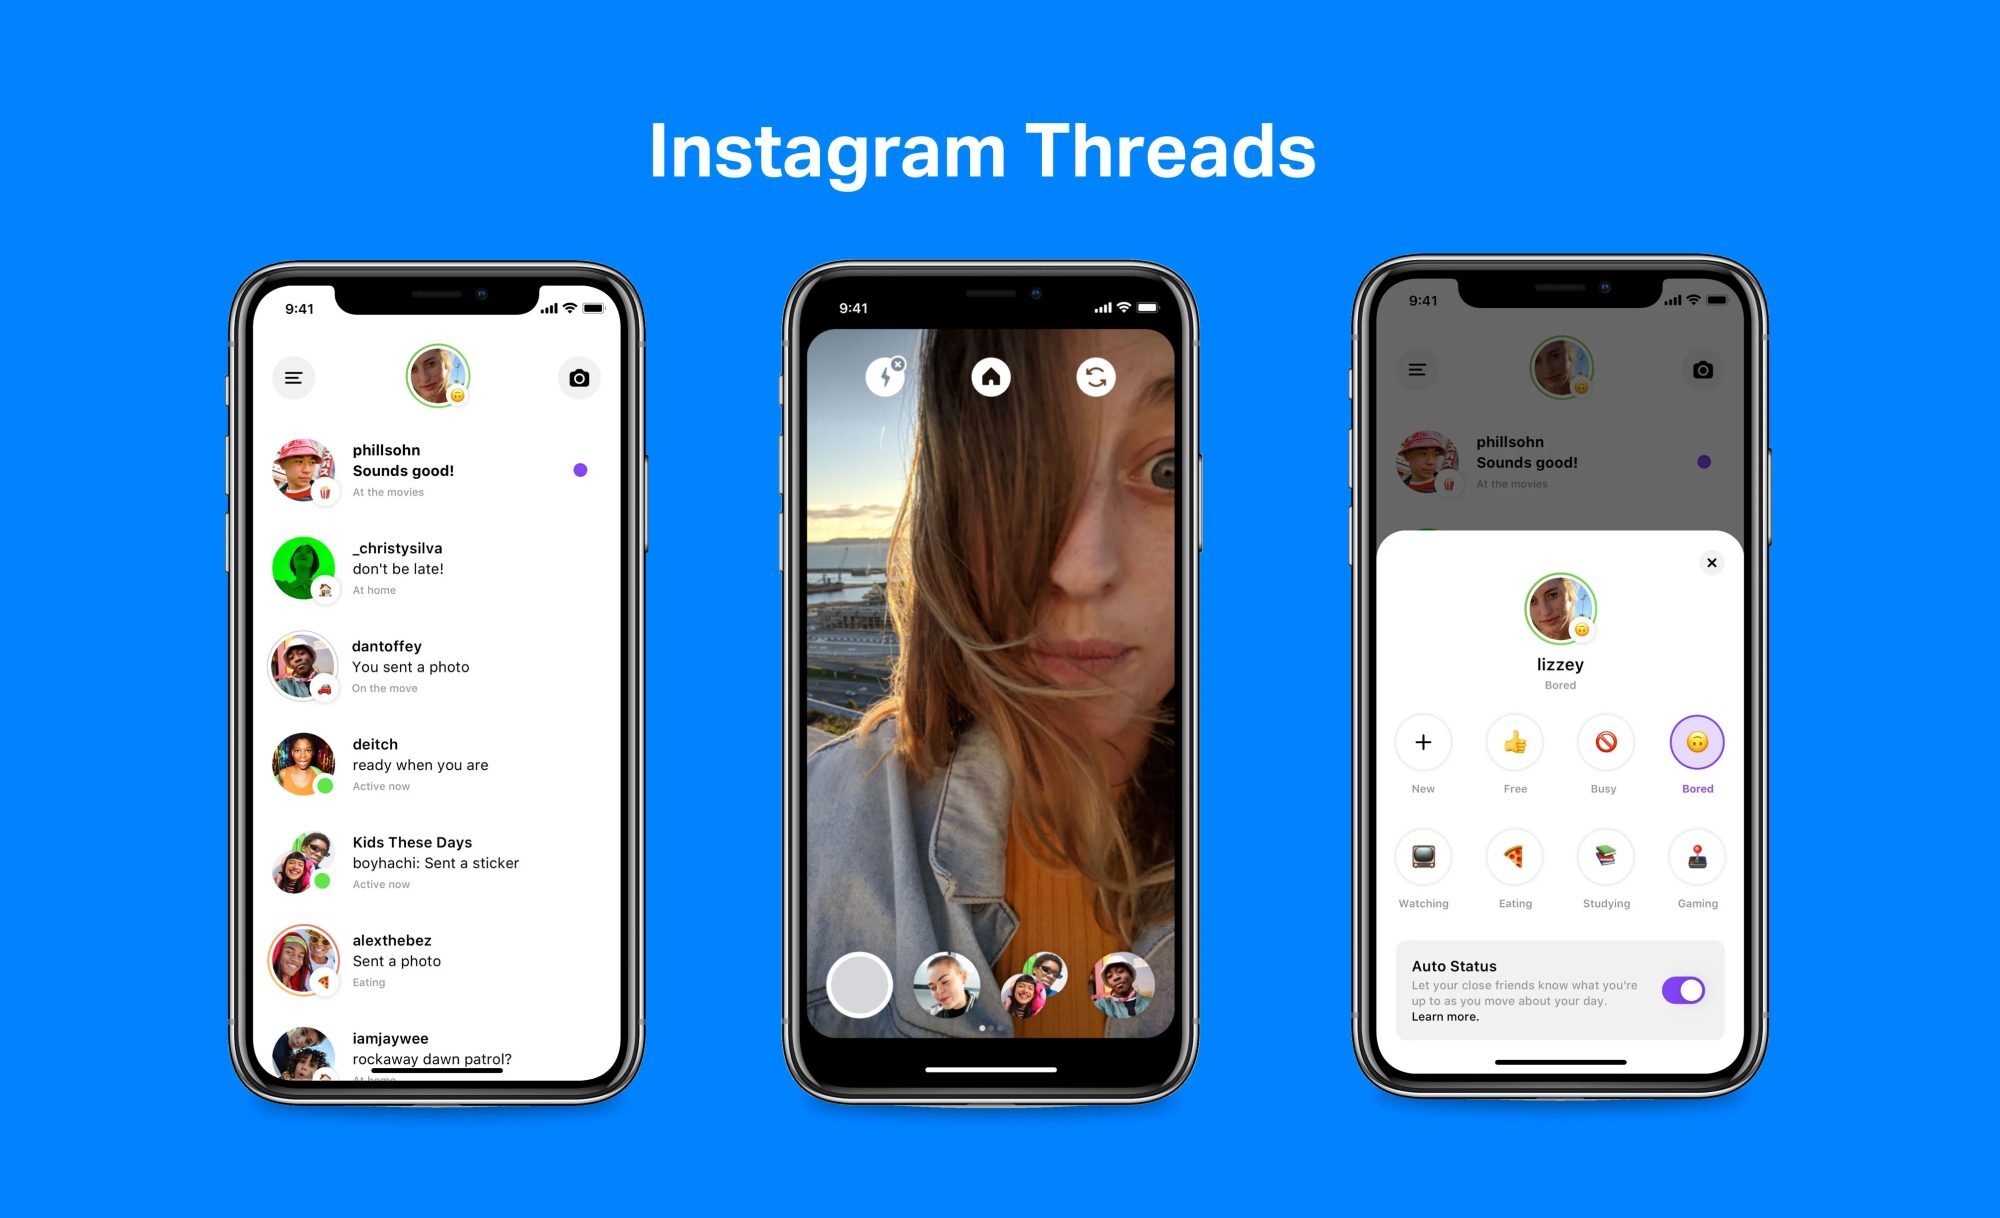 Instagram Threads app is getting discontinued next month